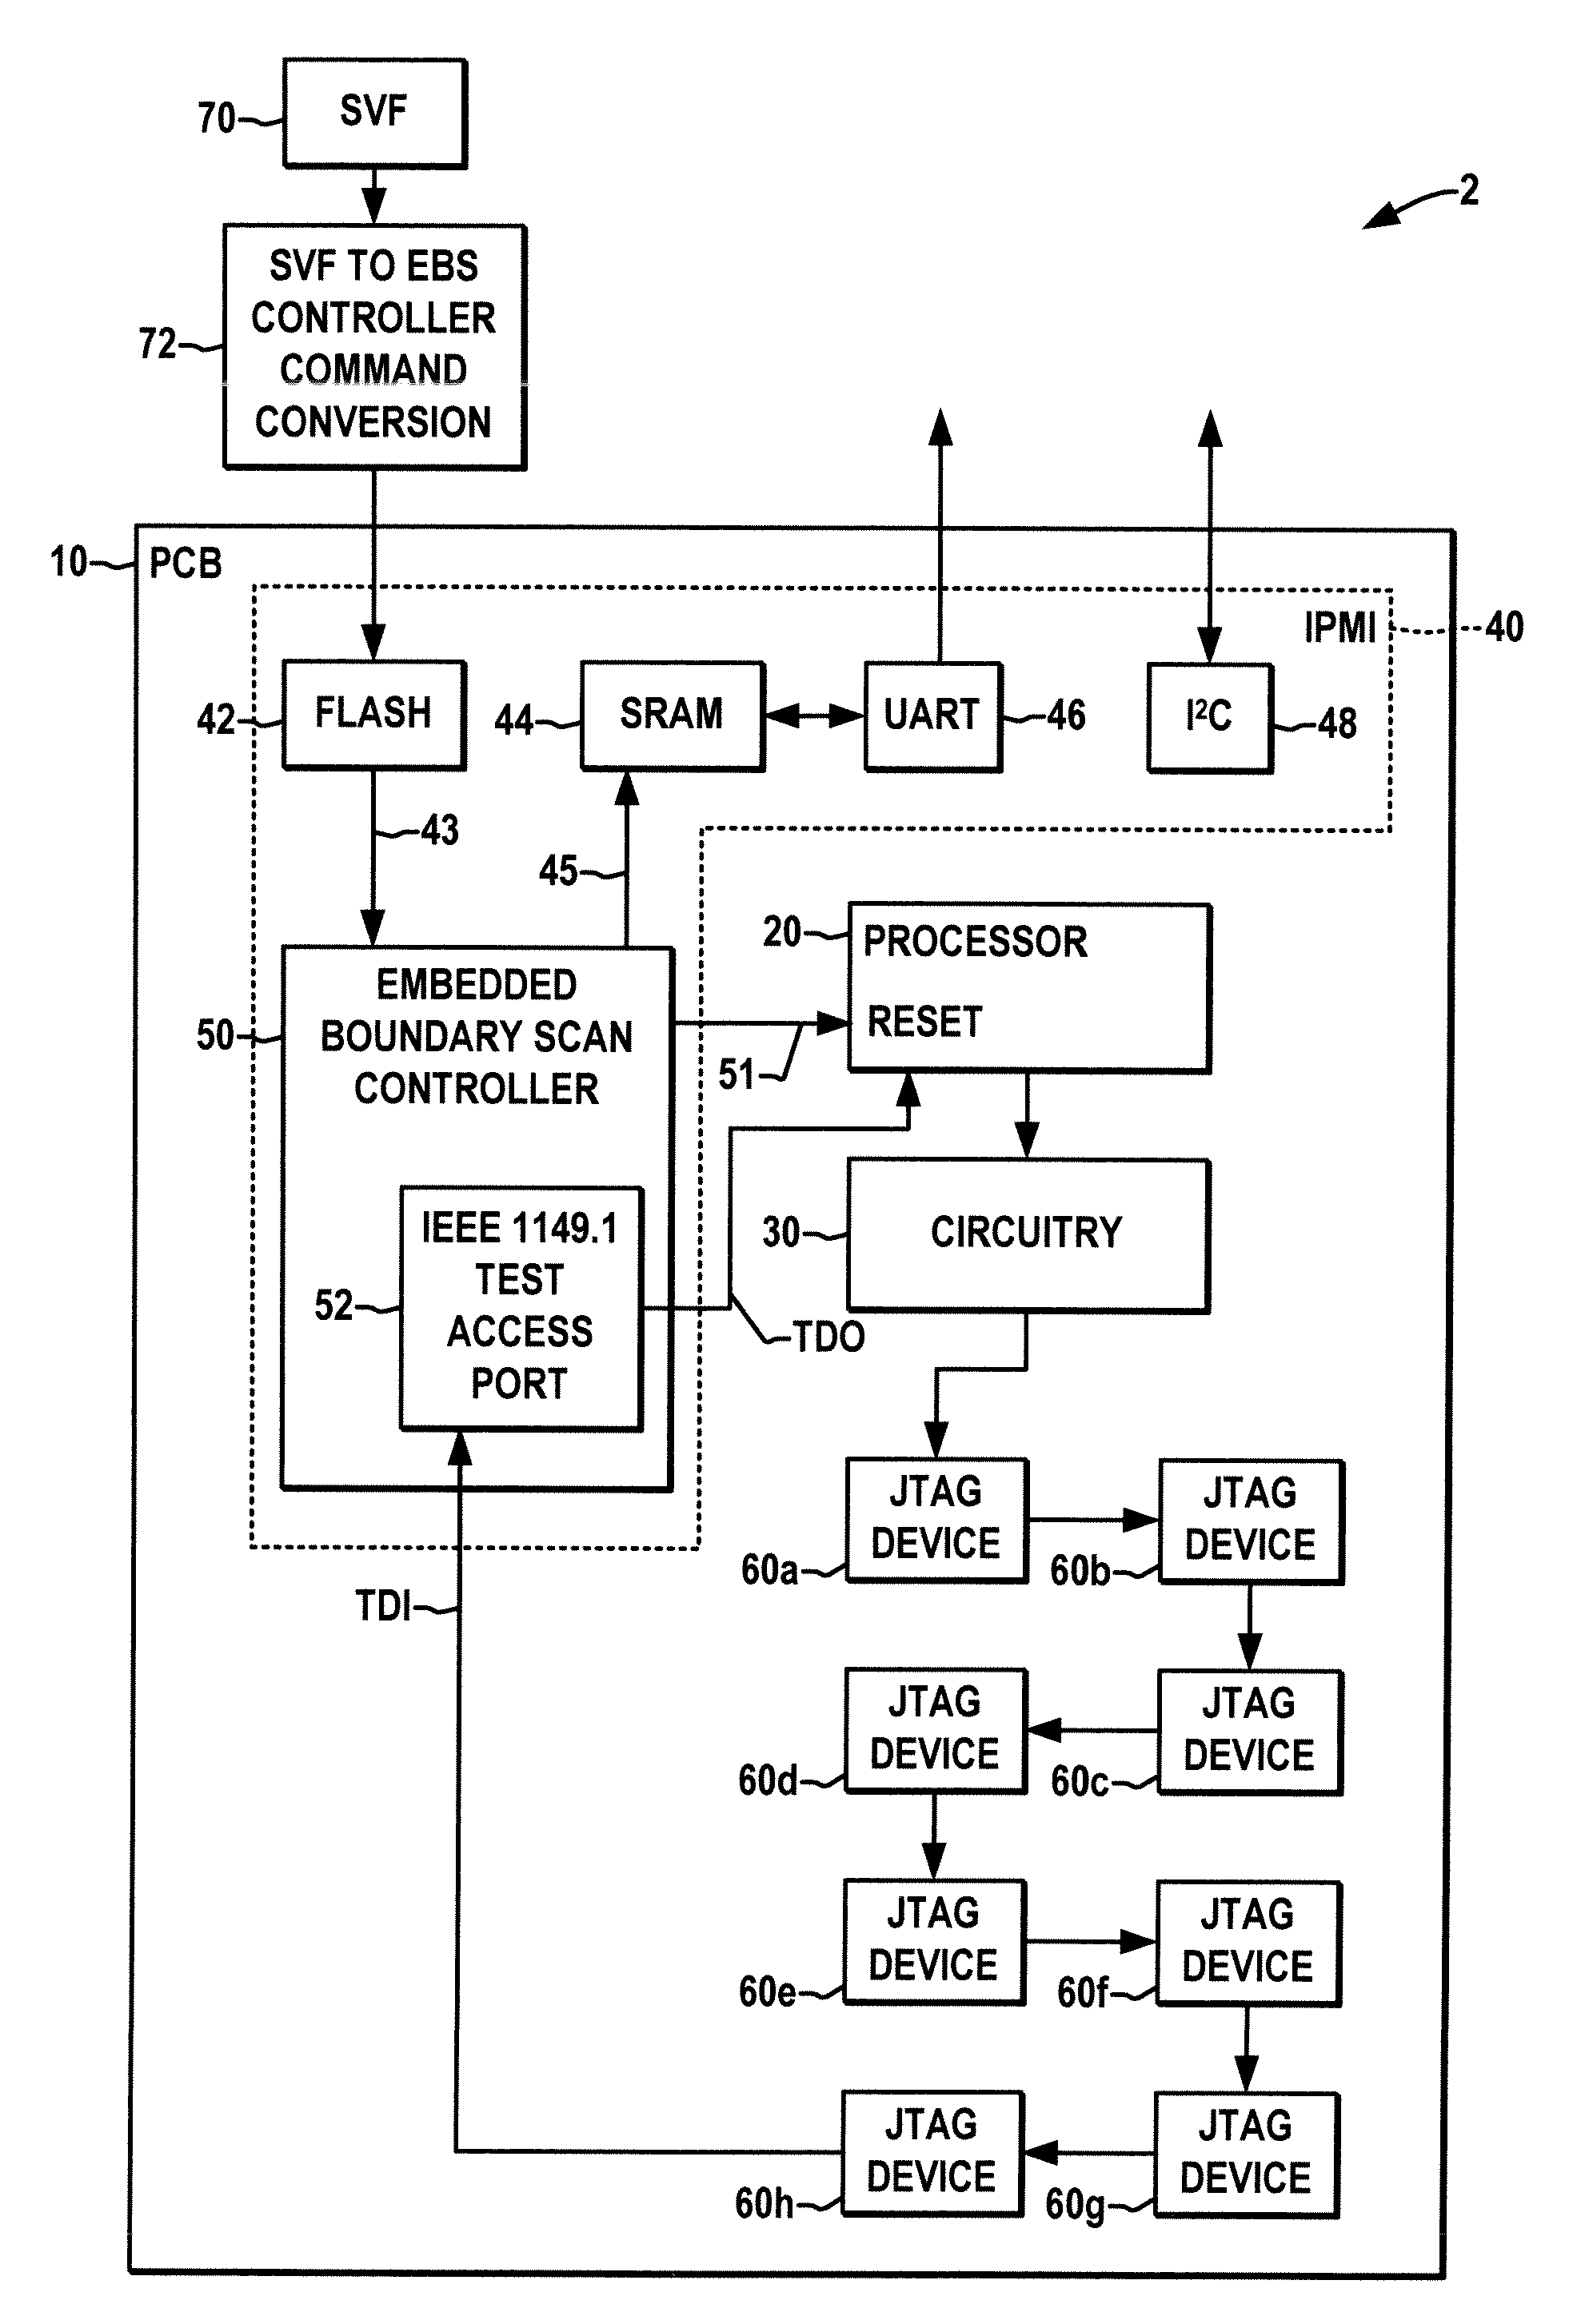 Apparatus and method for embedded boundary scan testing